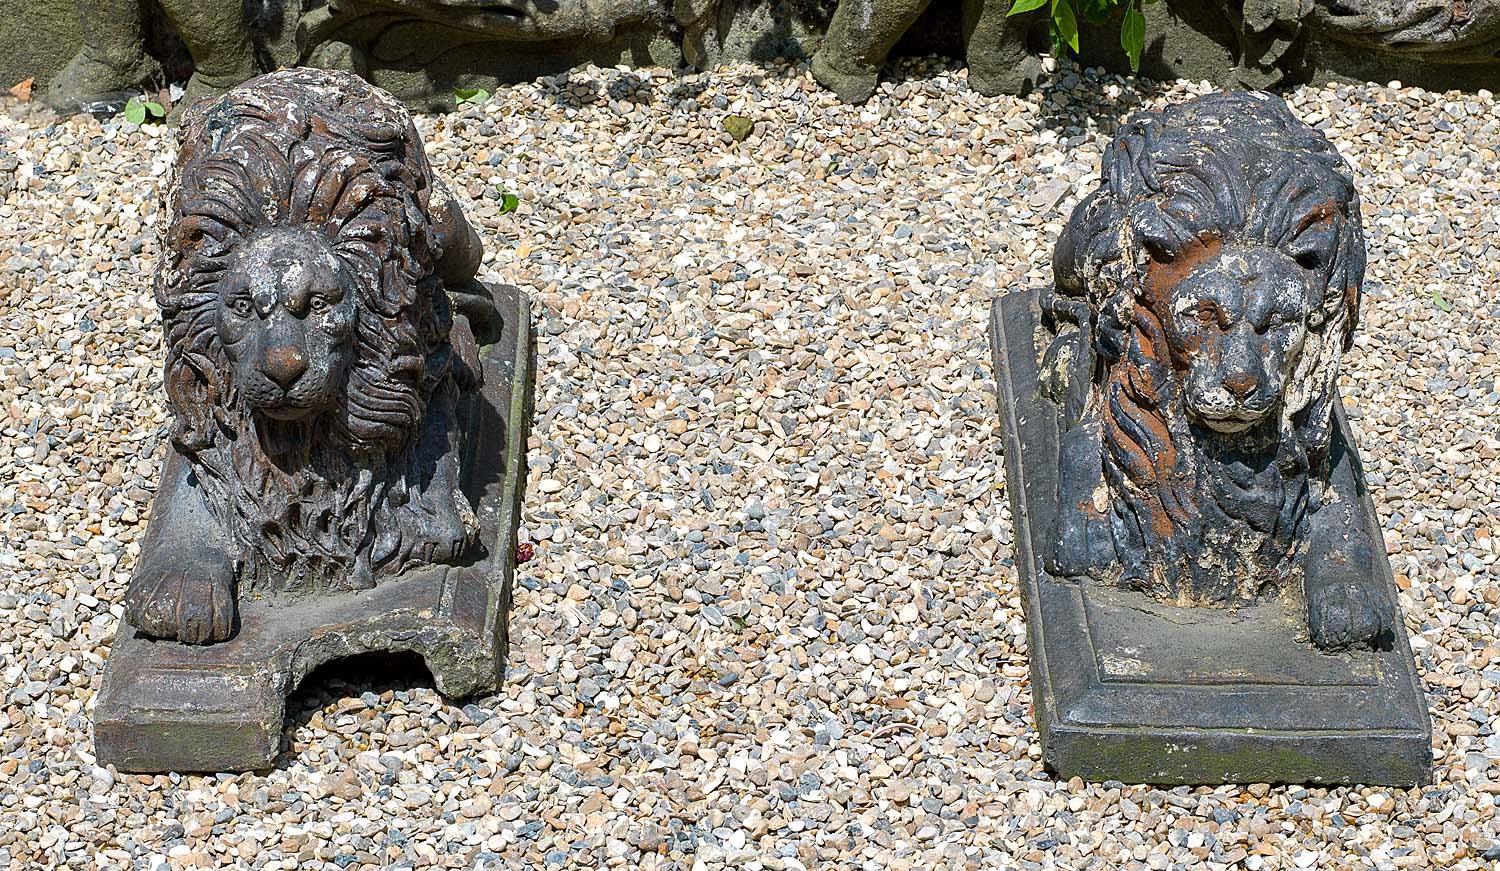 A pair of Victorian recumbent antique terracotta garden lions raised on molded bases - one base is damaged and they have once been painted and stripped - as found.
English, 19th century.